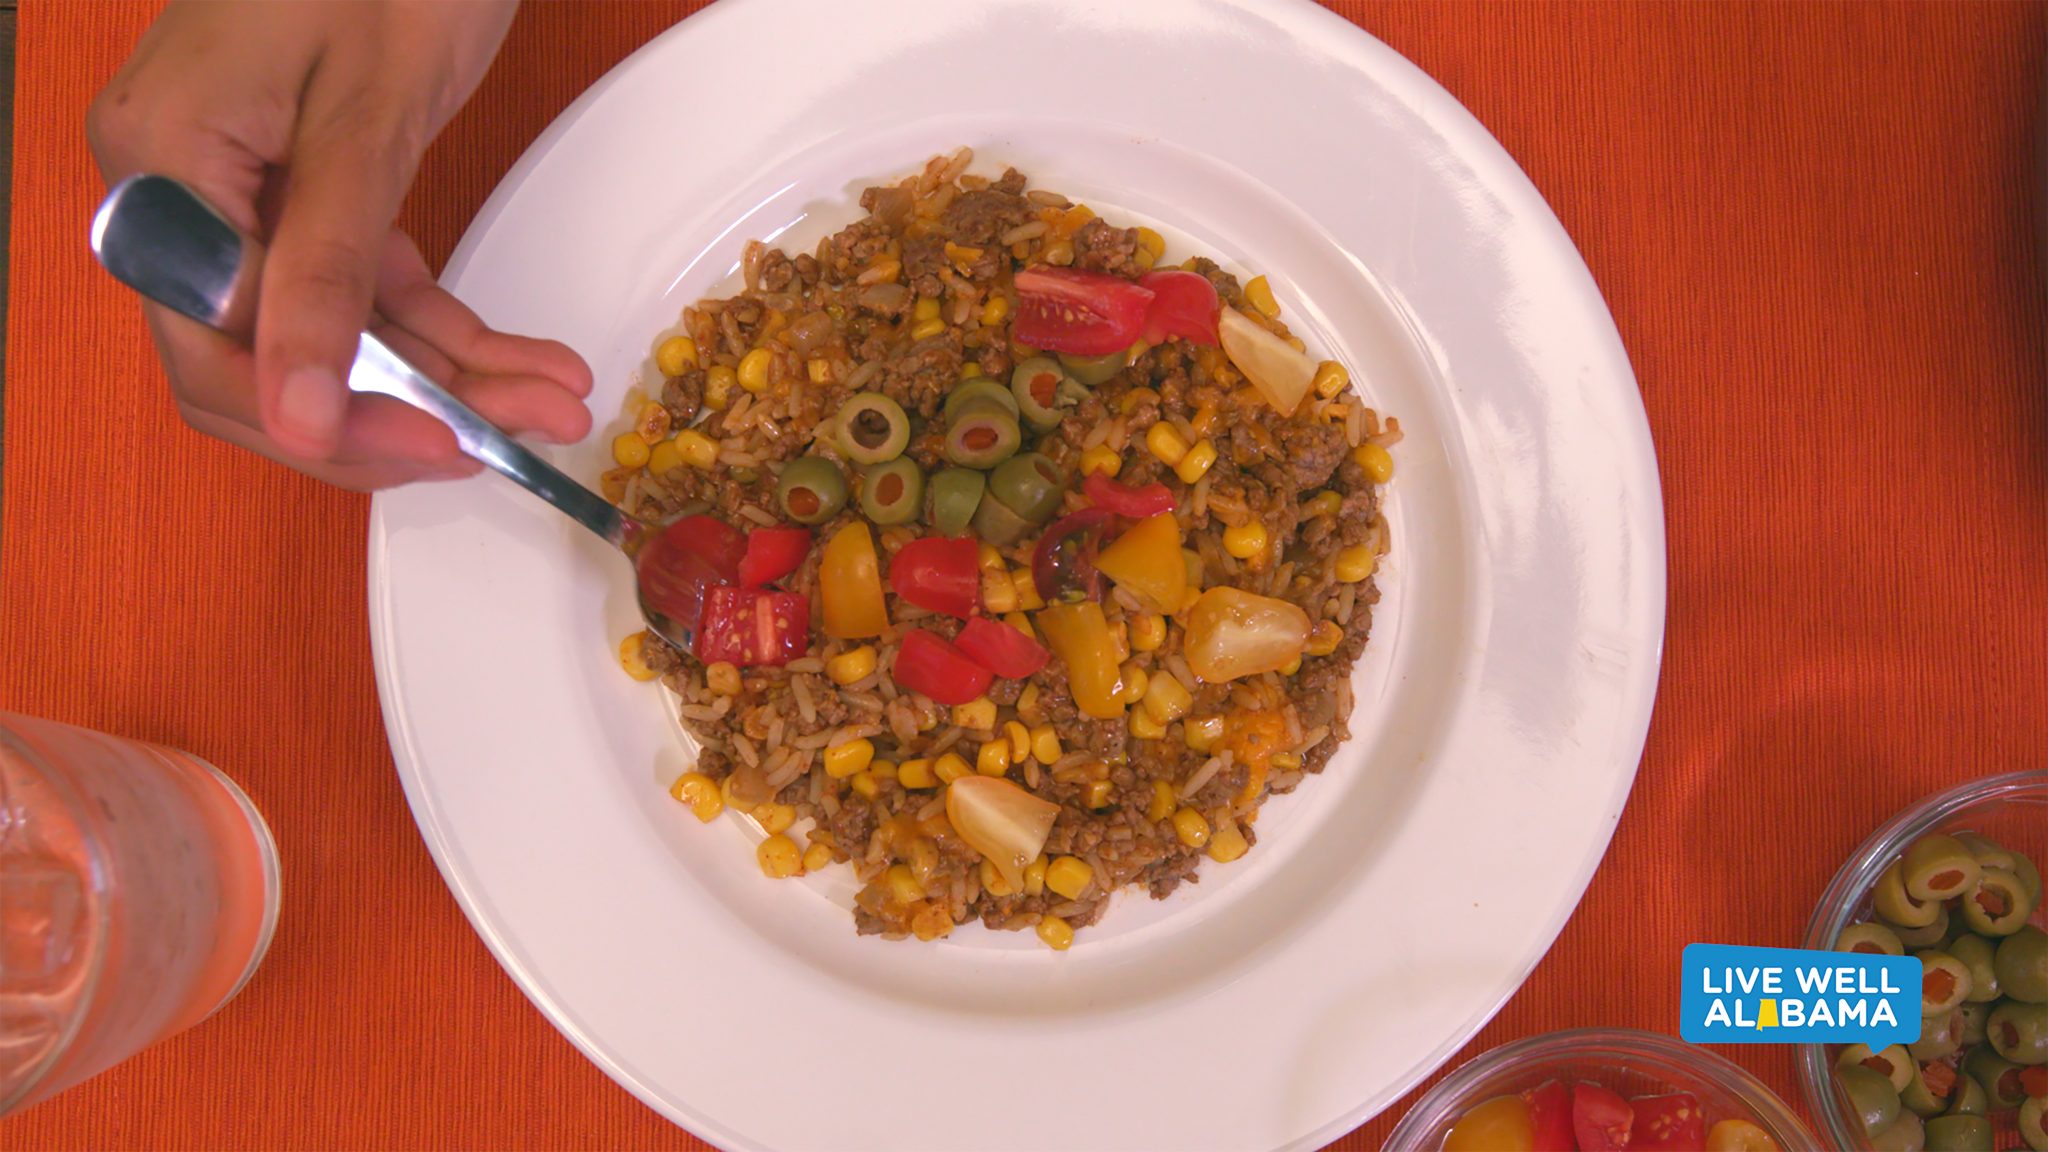 Live Well Alabama recipe, Enchilada Rice, with corn, tomatoes, and other optional veggies.